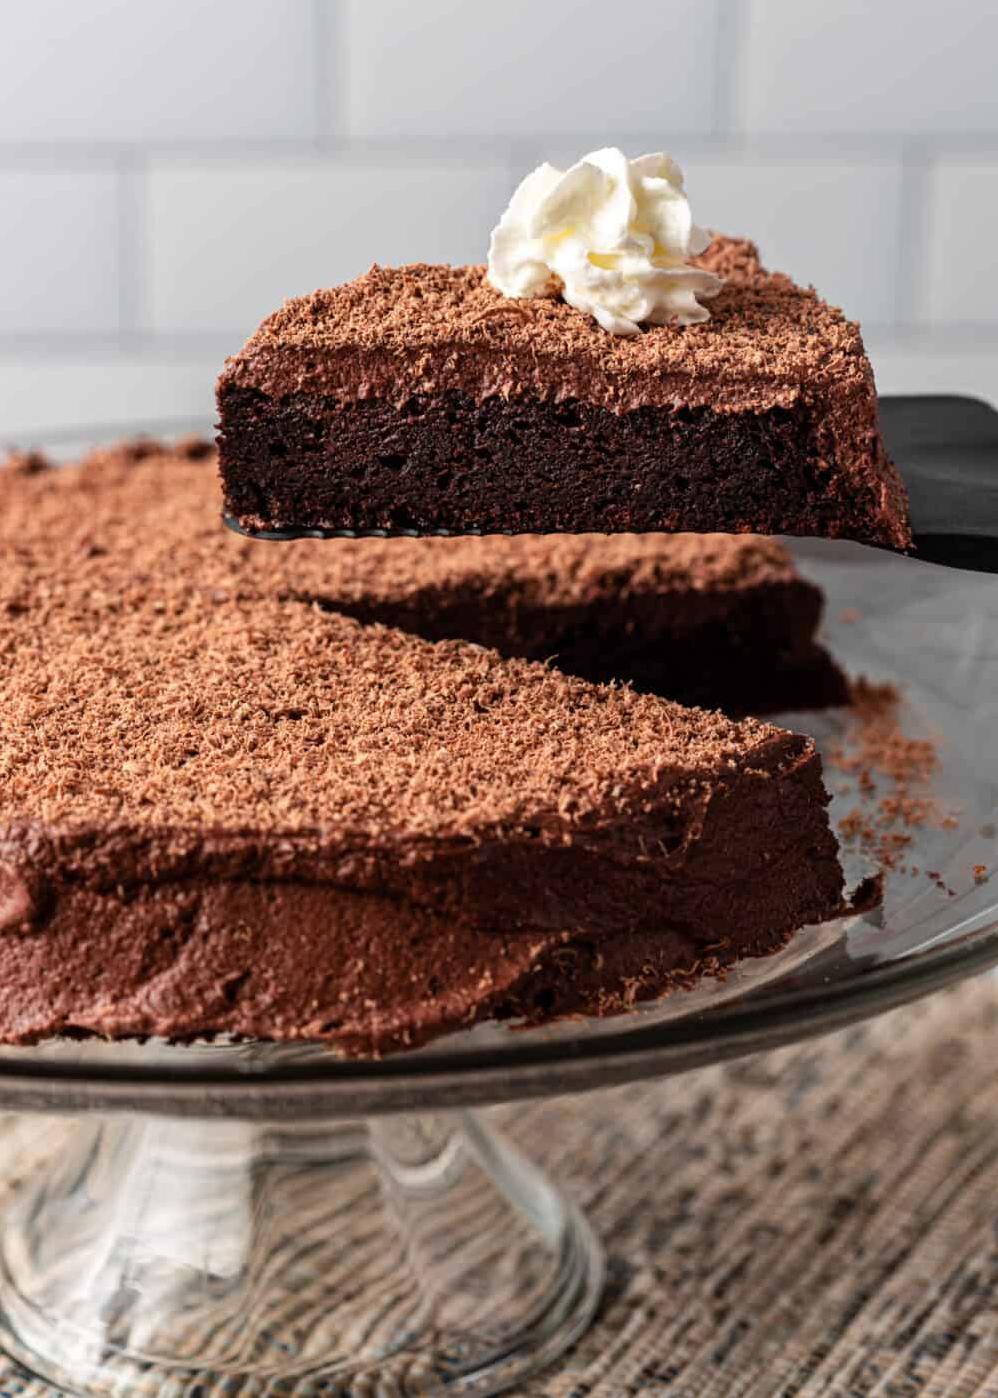  Satisfy your sweet cravings with this Dutch Mocha Chocolate Cake